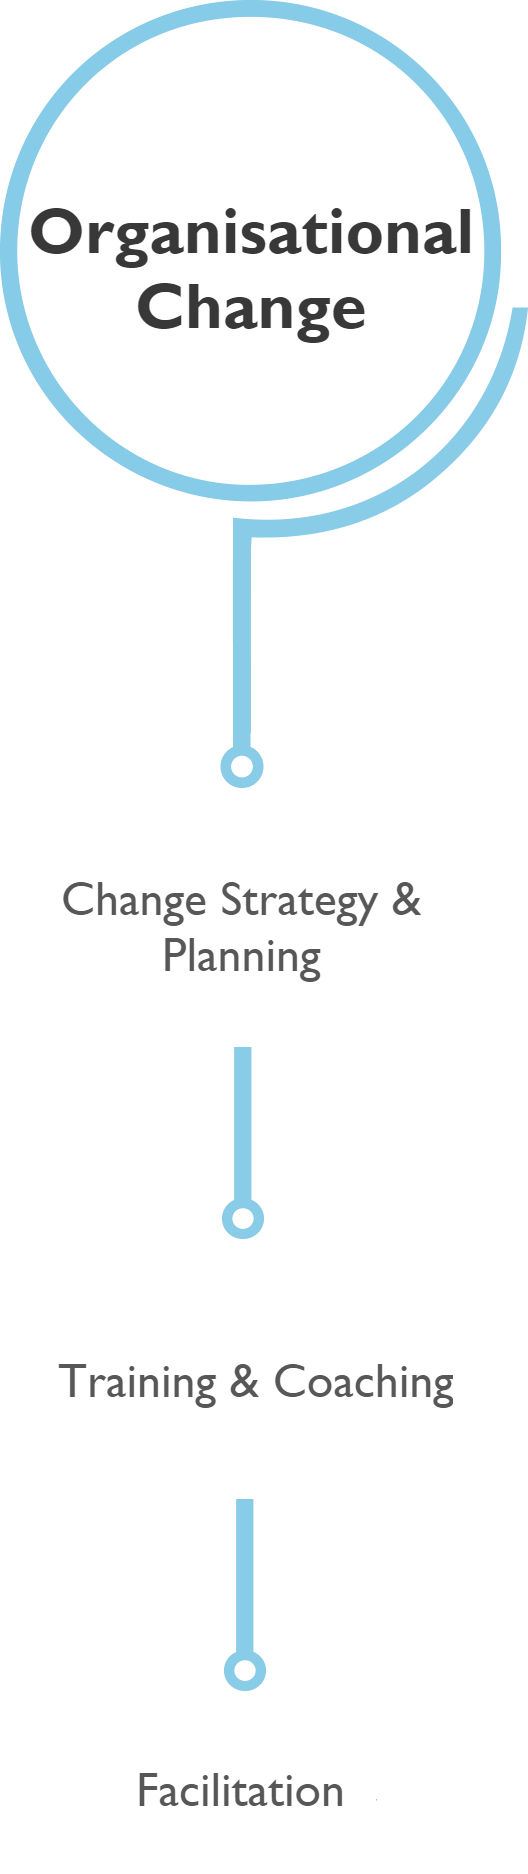 Organisational change detailed services